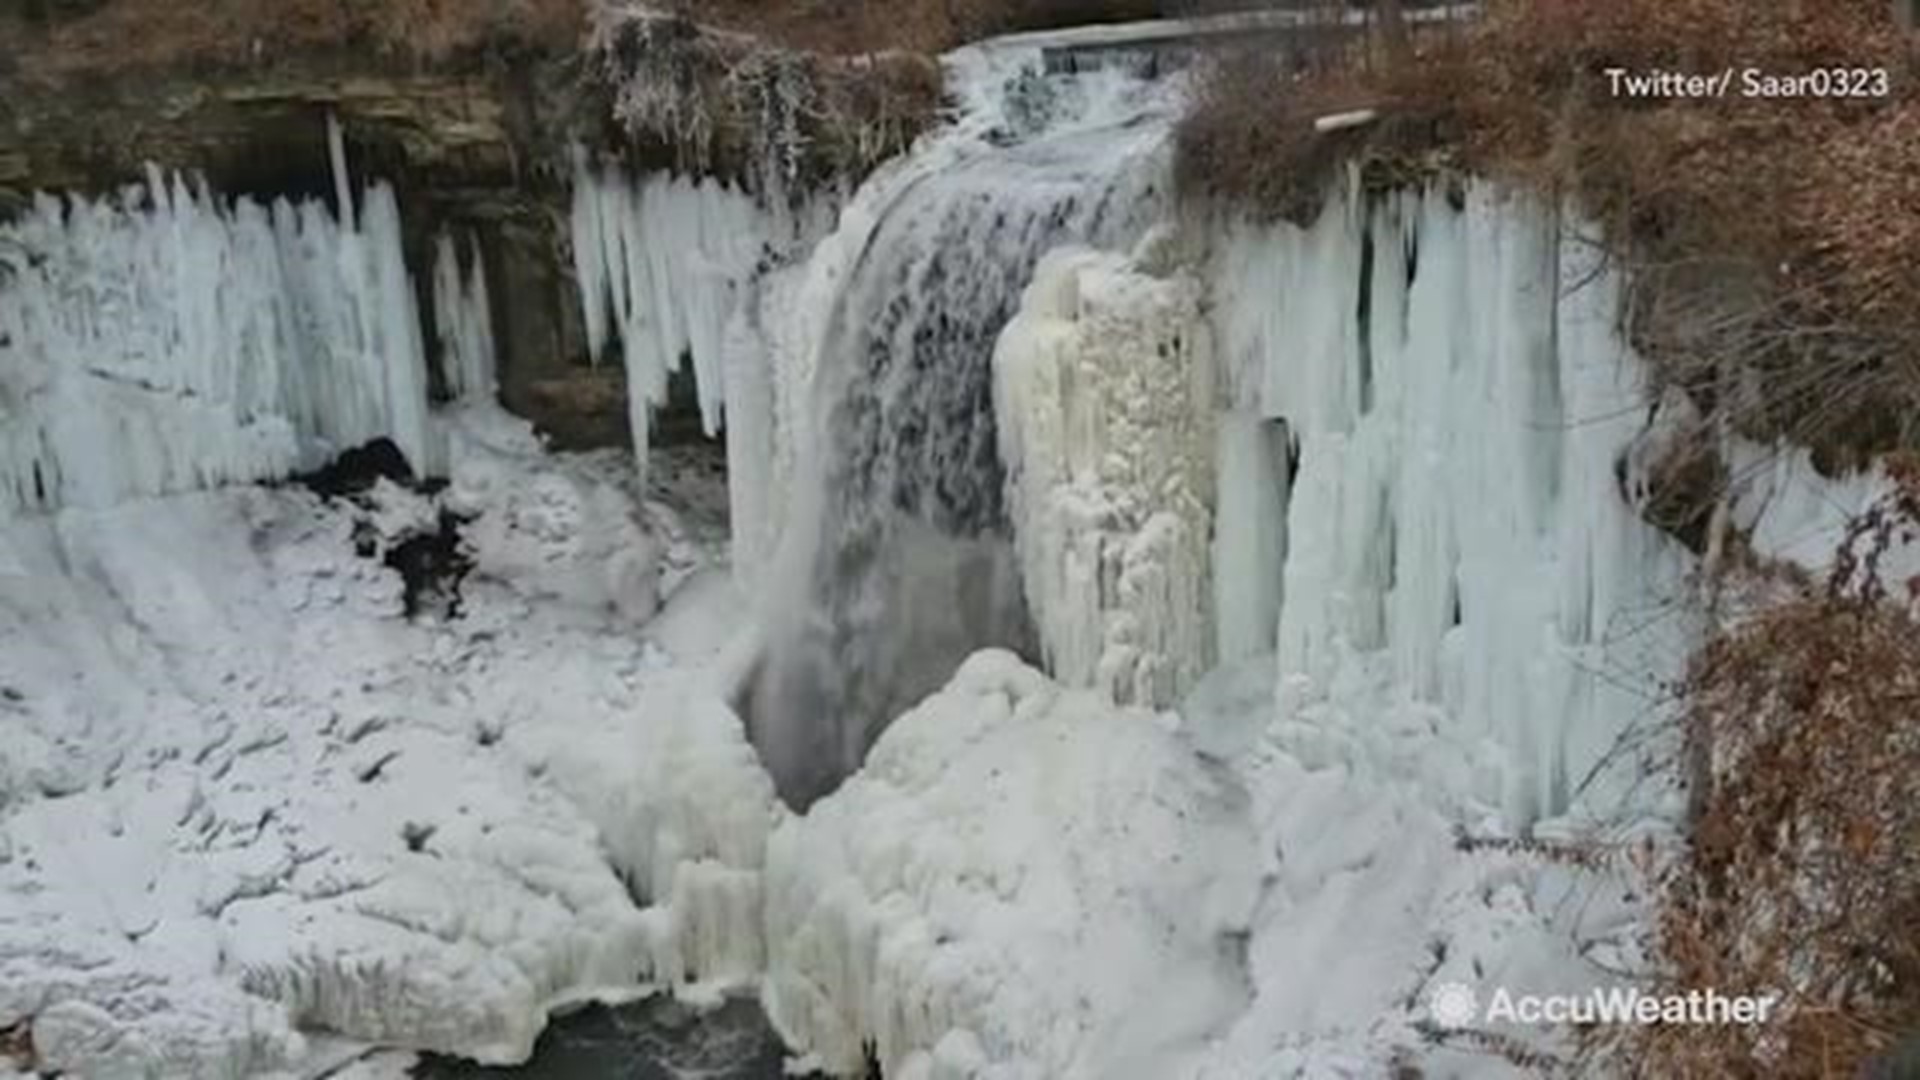 Incredible view of the Minnehaha Falls in Minneapolis, Minnesota. Part of the waterfall is frozen, adding to its beauty.